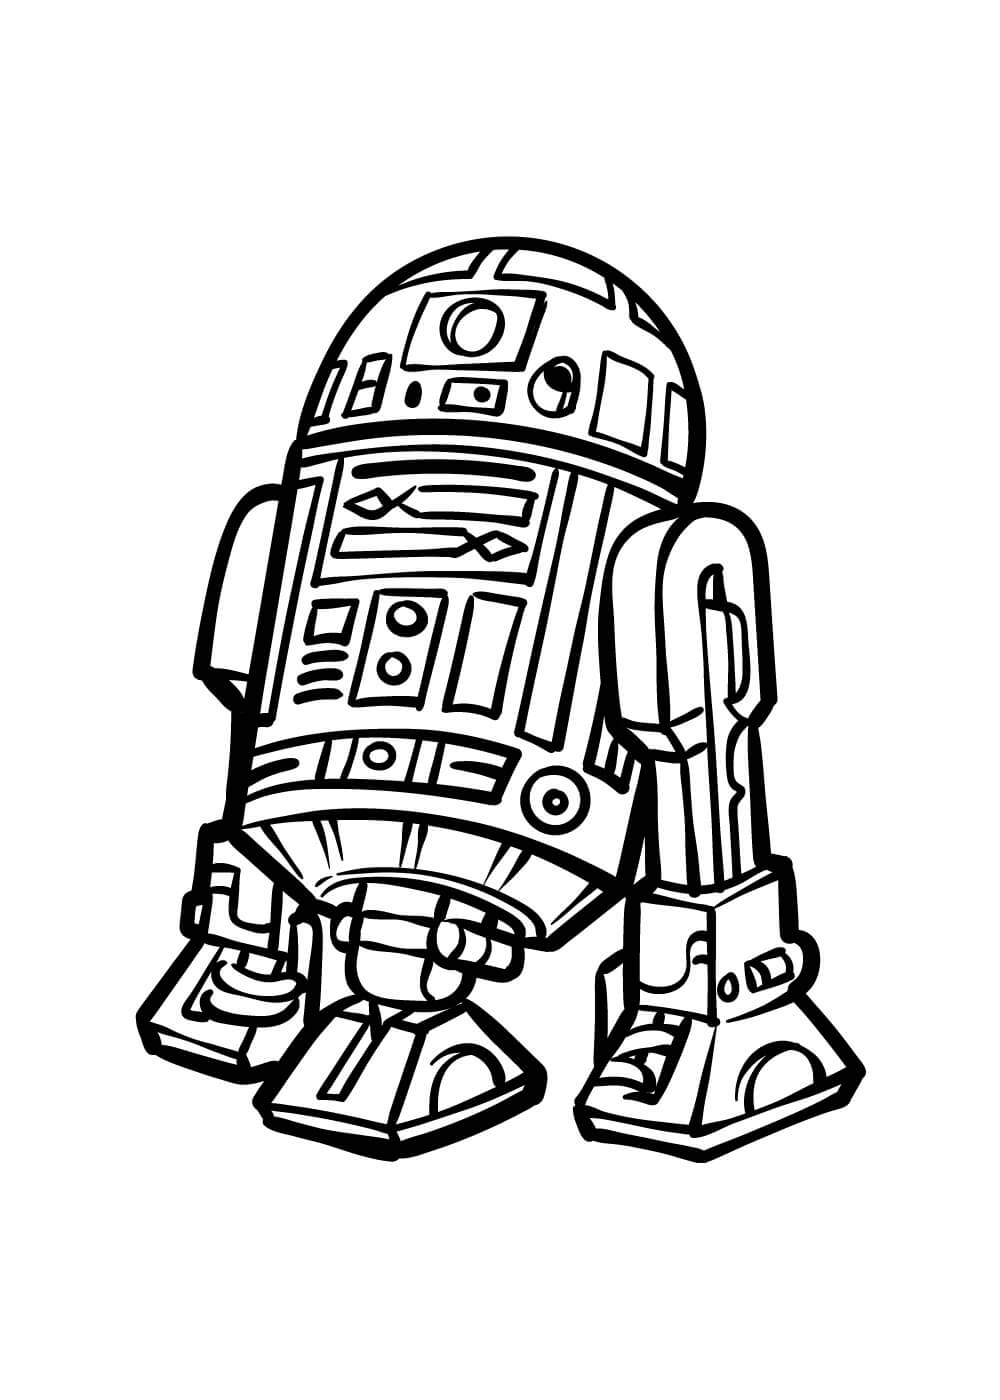 Star Wars R2-D2 coloring page